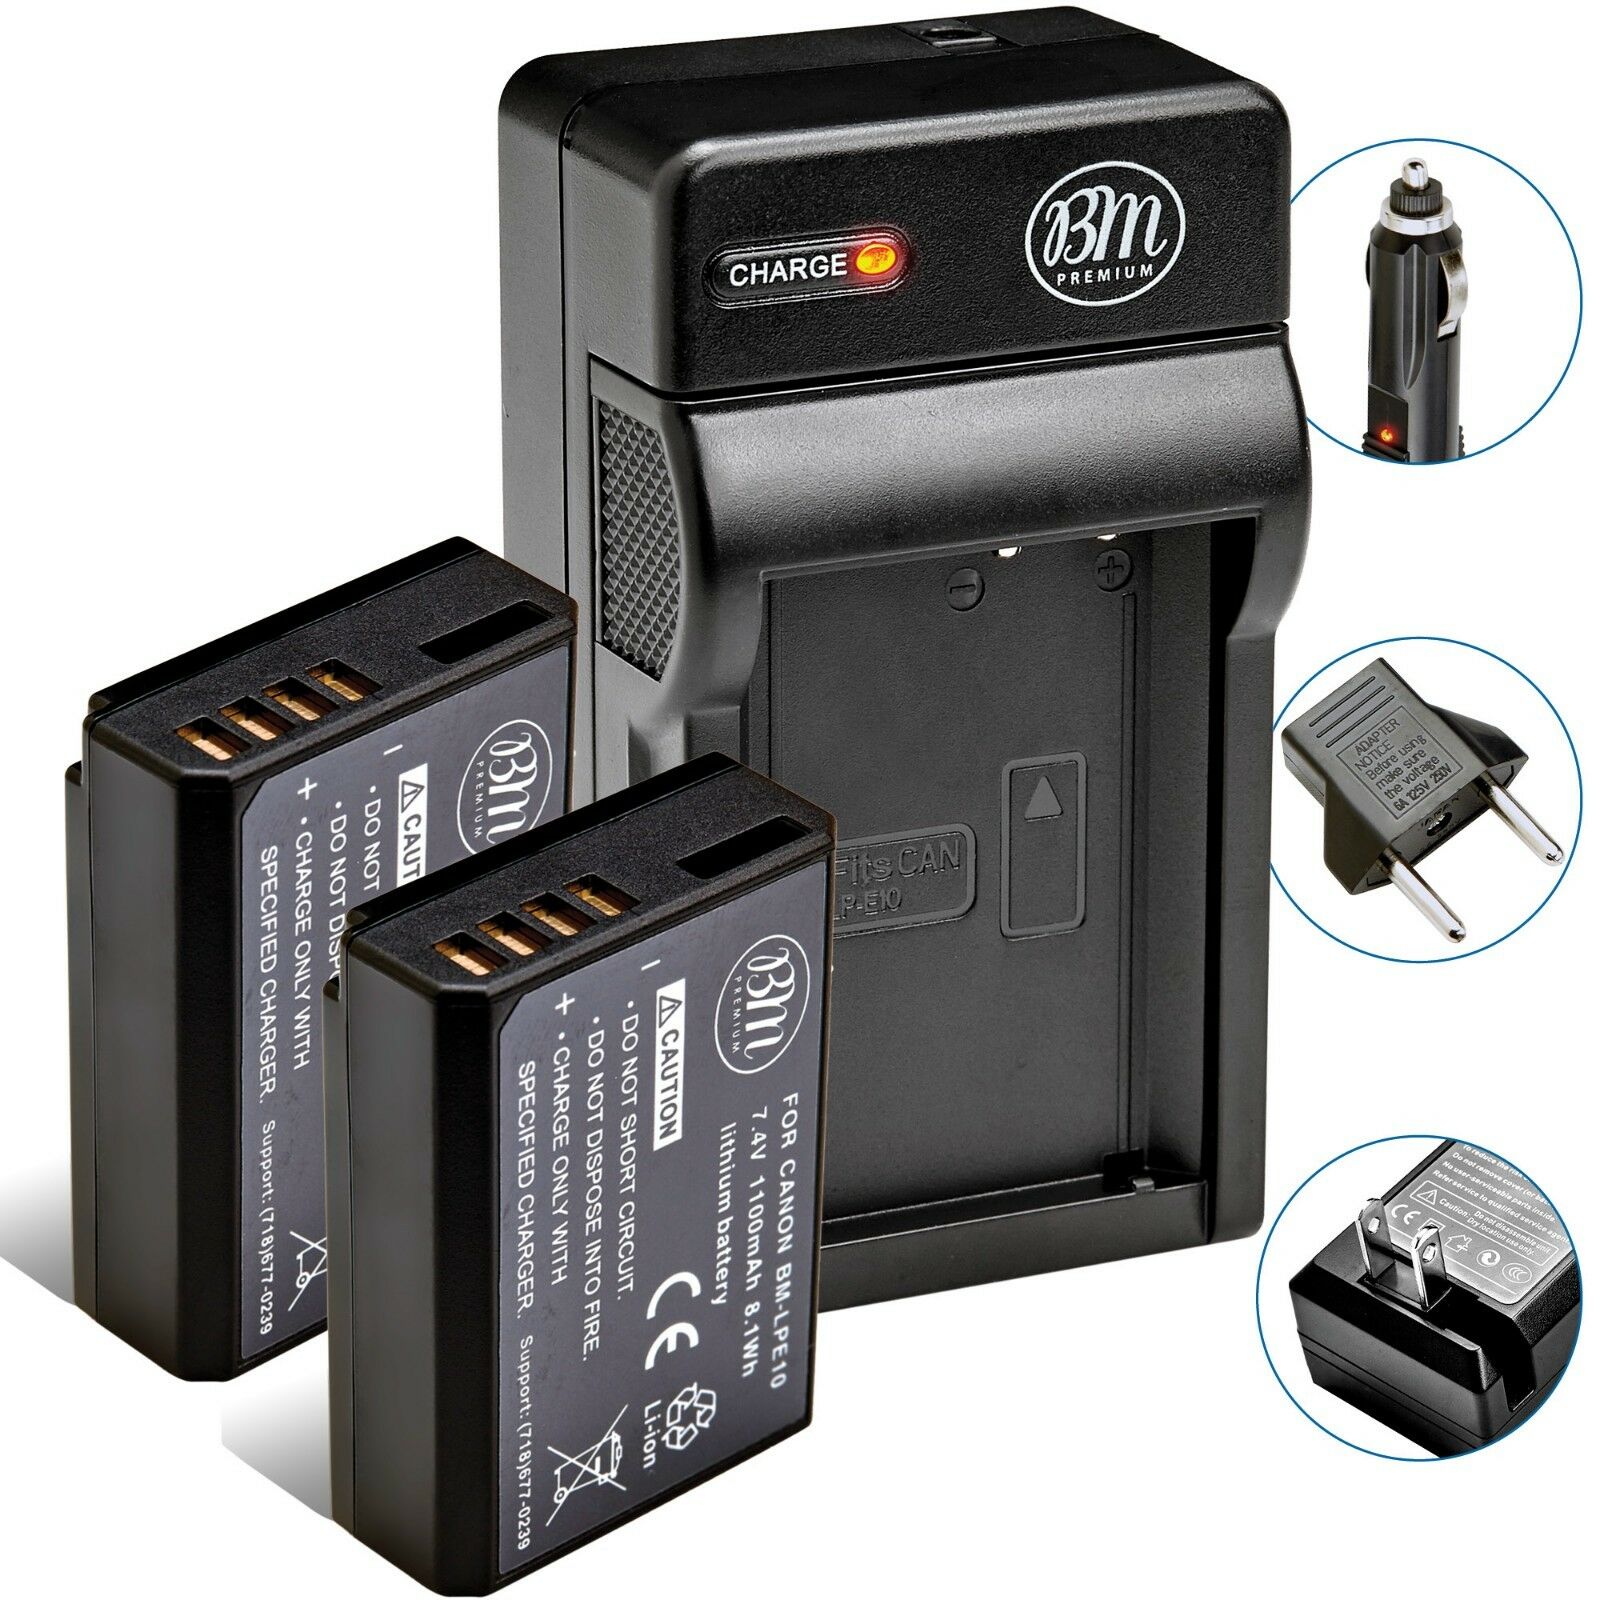 2 Pack Lp-e10 Battery + Charger For Canon Rebel T3, T5, T6, T7, Eos 1200d, 1300d